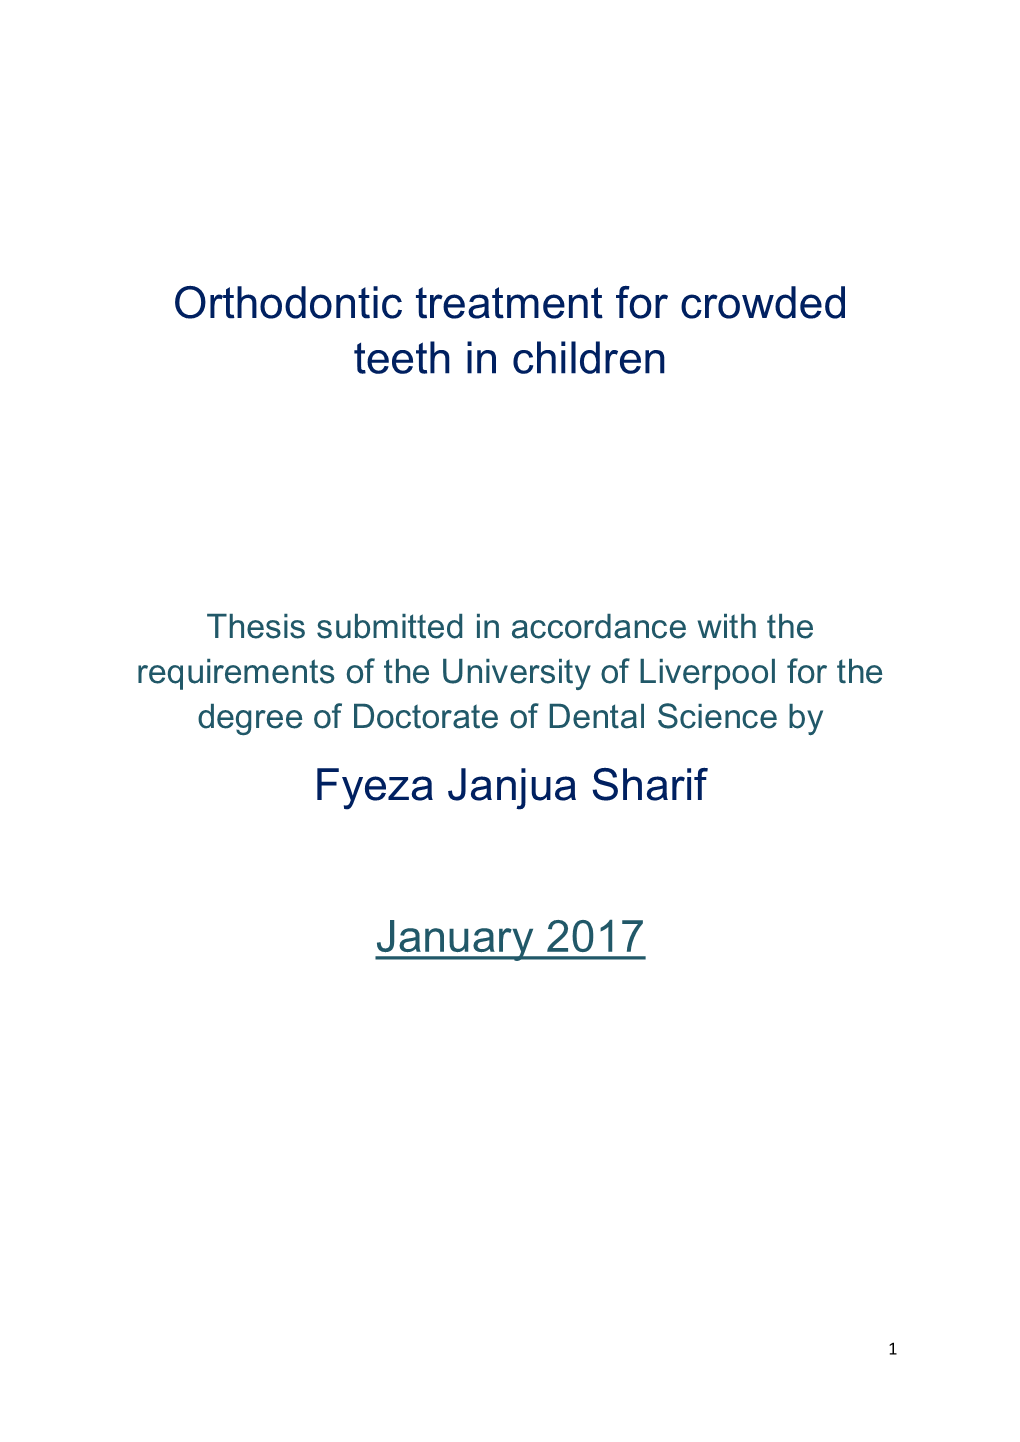 Orthodontic Treatment for Crowded Teeth in Children